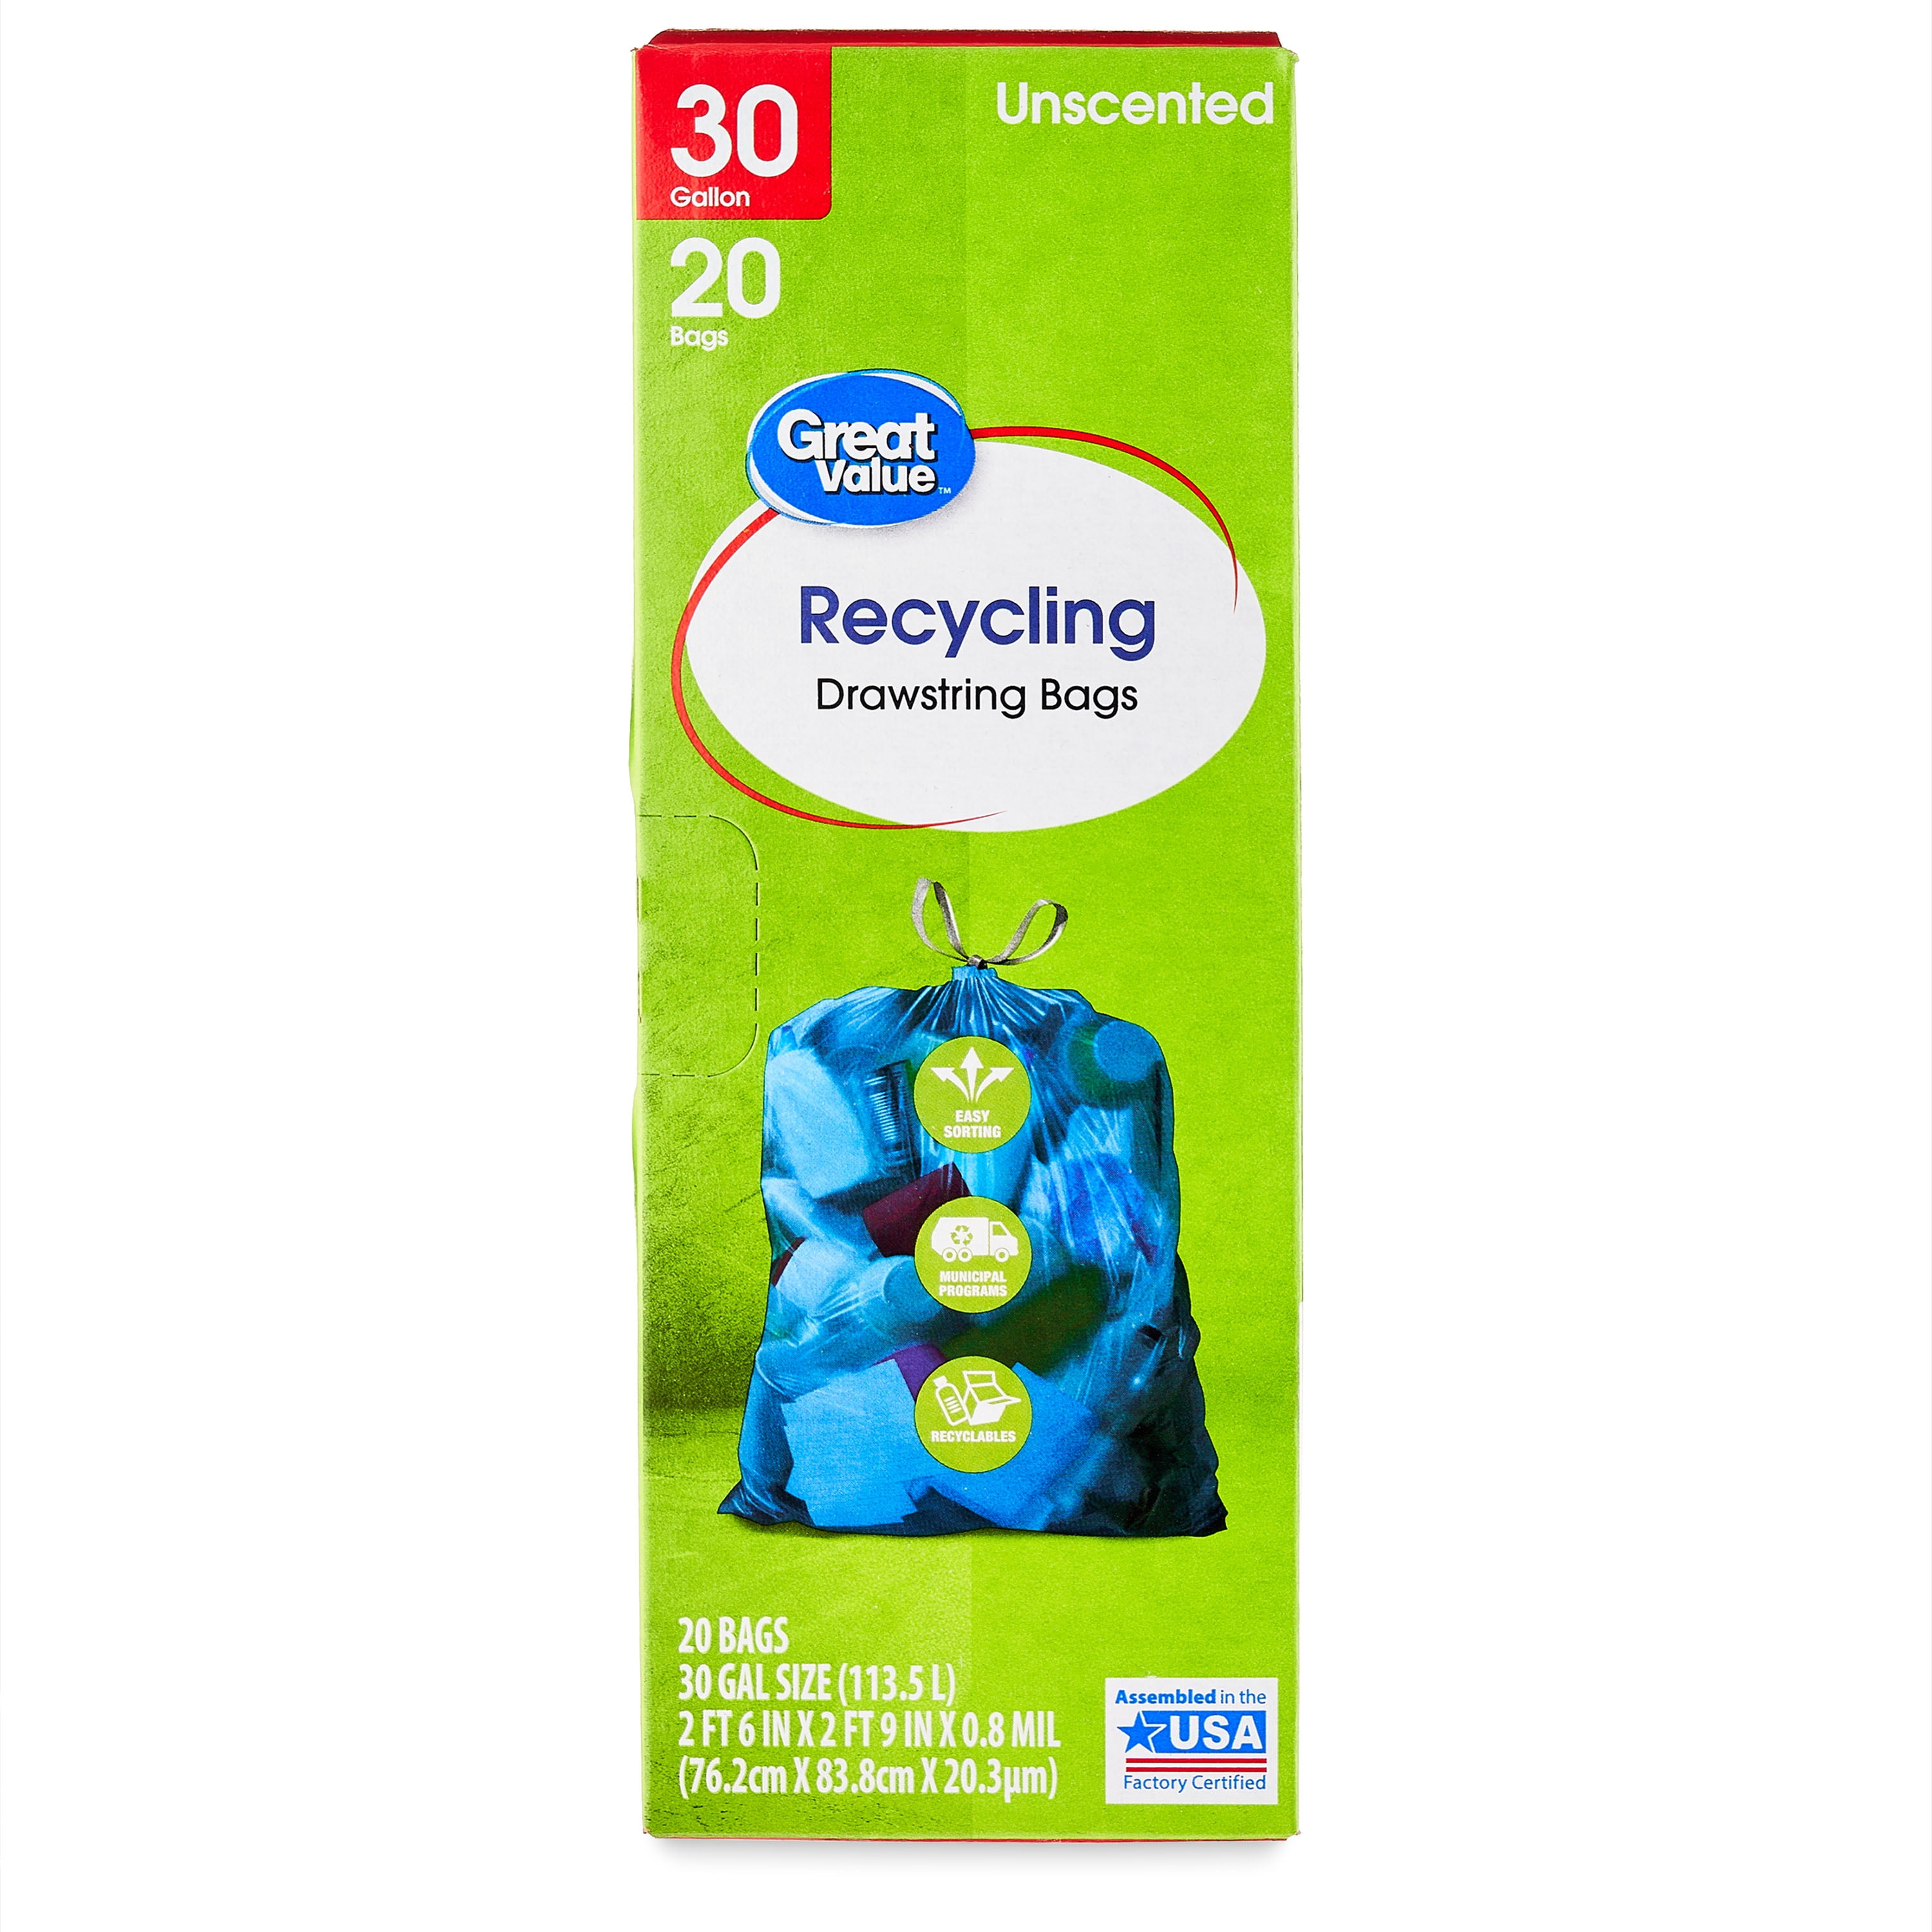 Great Value Blue 30-Gallon Drawstring Large Recycling Bags, Unscented, 20 Count